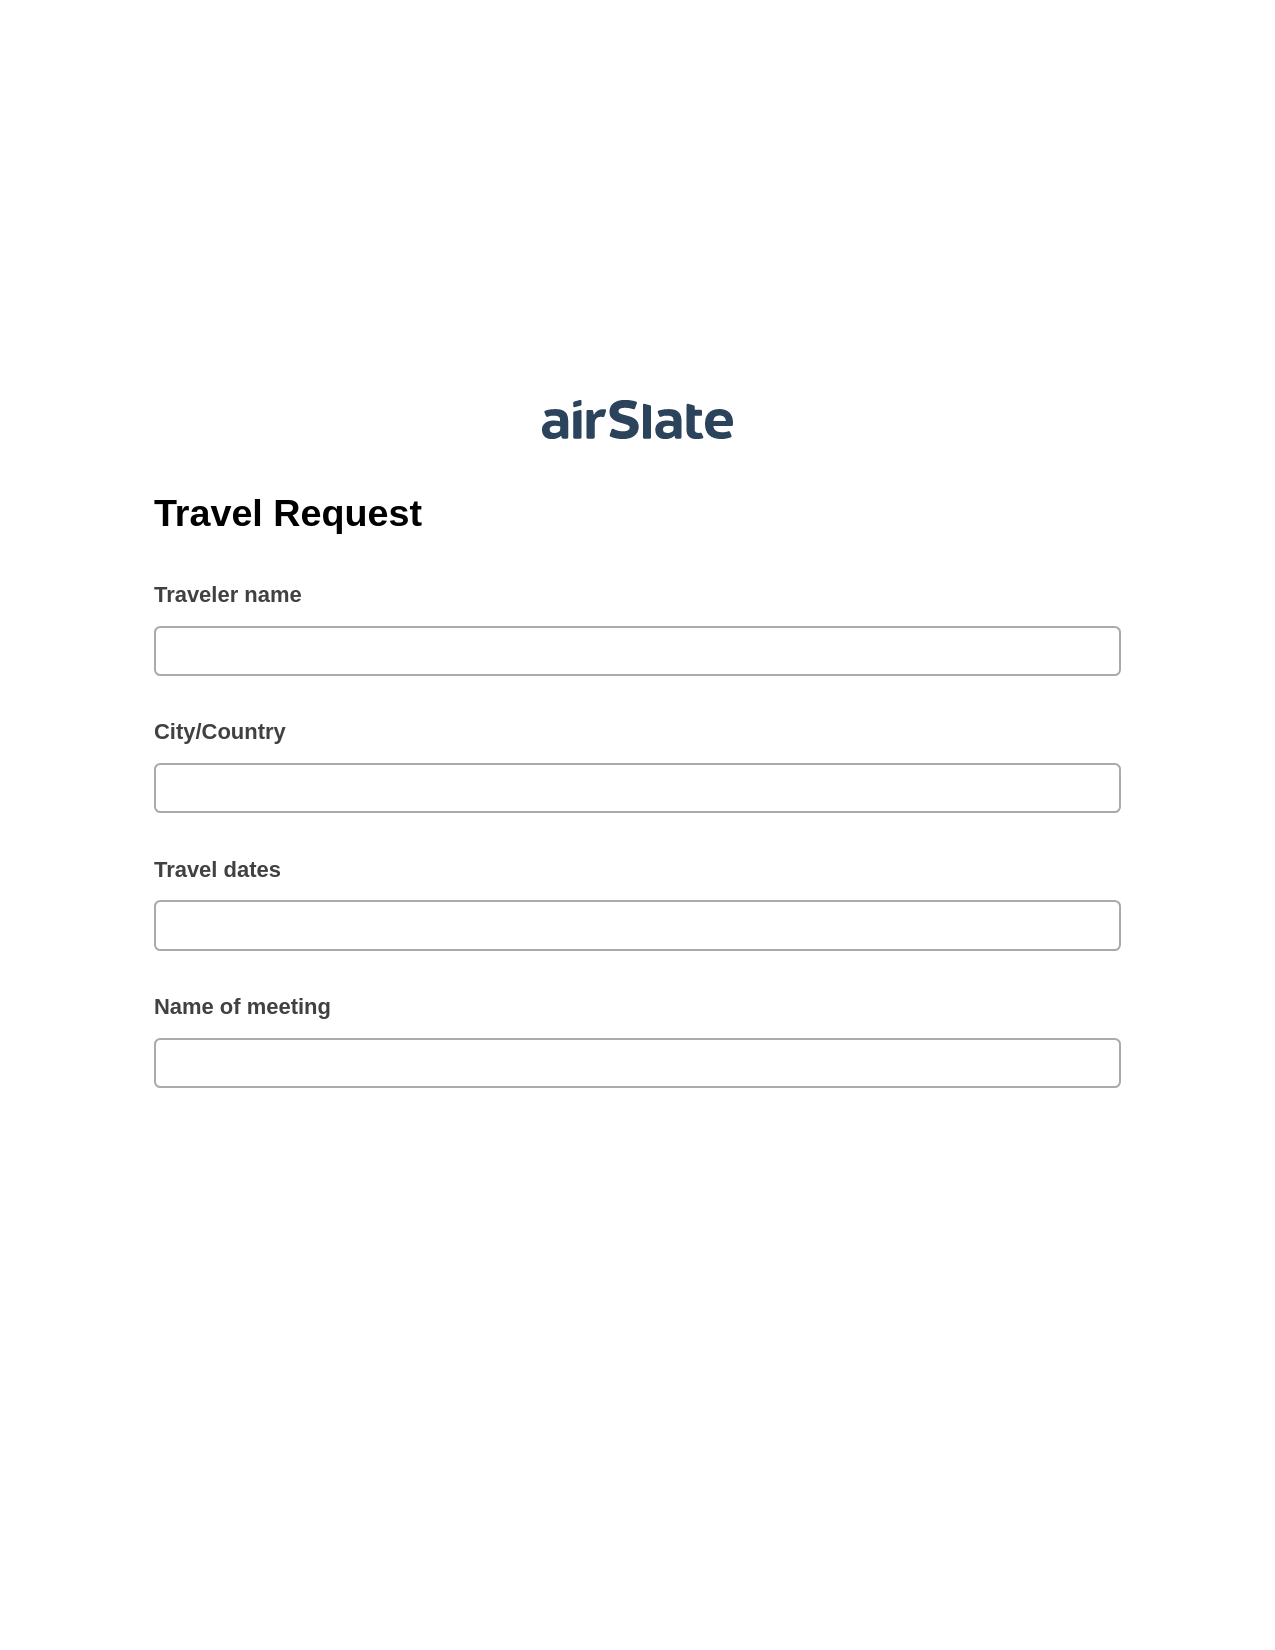 Travel Request Pre-fill Slate from MS Dynamics 365 Records Bot, Pre-fill with Custom Data Bot, Email Notification Postfinish Bot